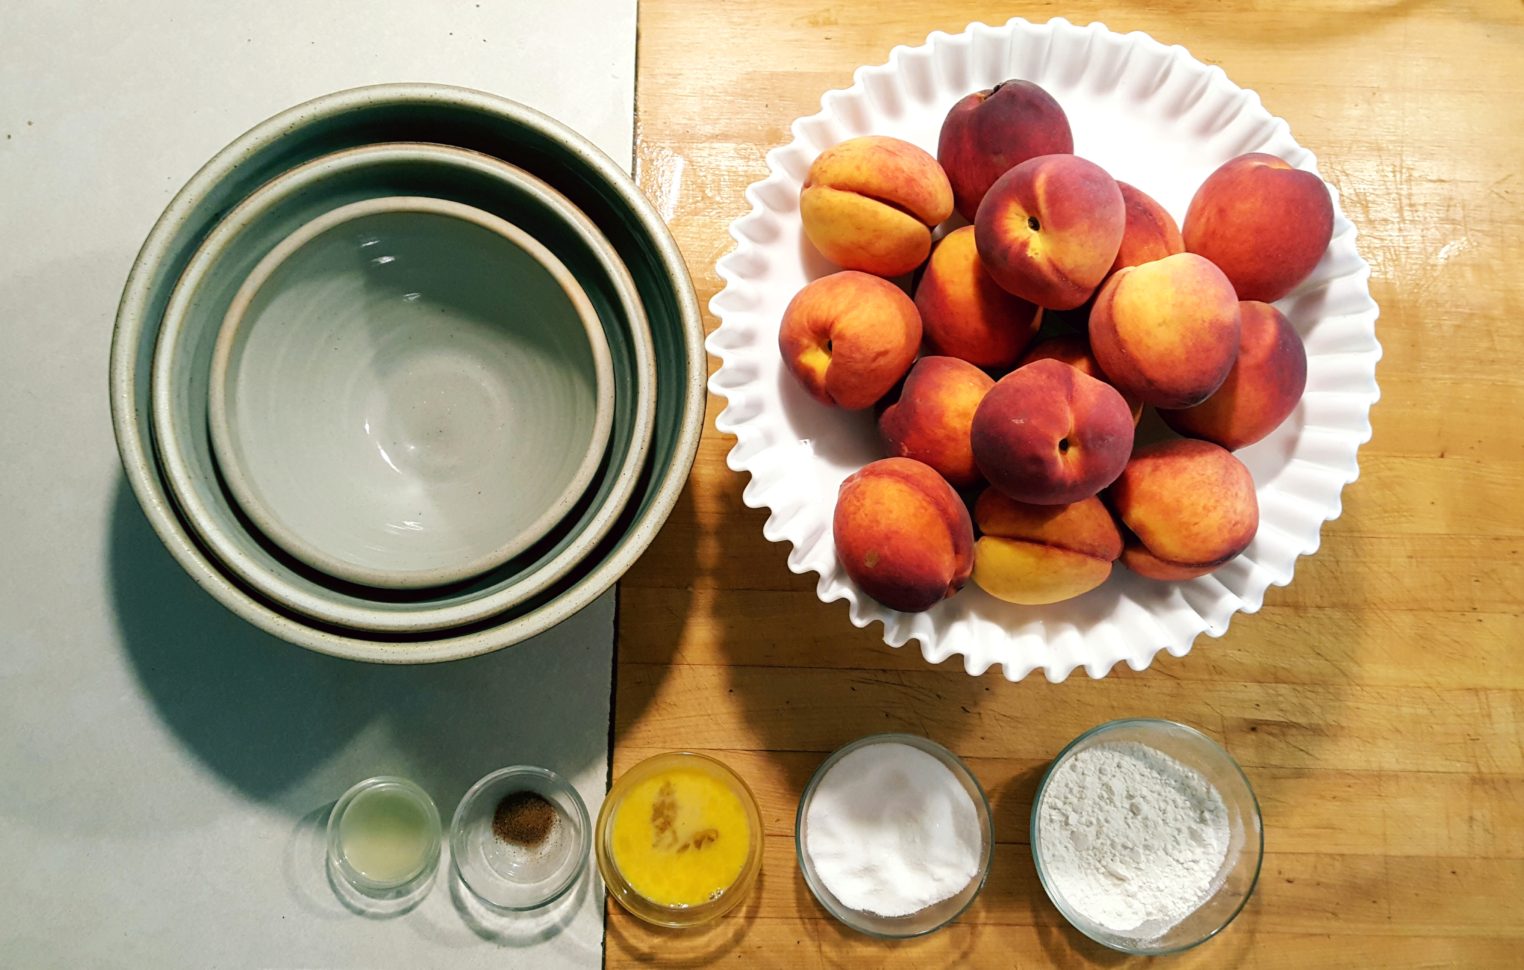 Texas peaches for a 4th of July pie on The Pillow Goddess blog!